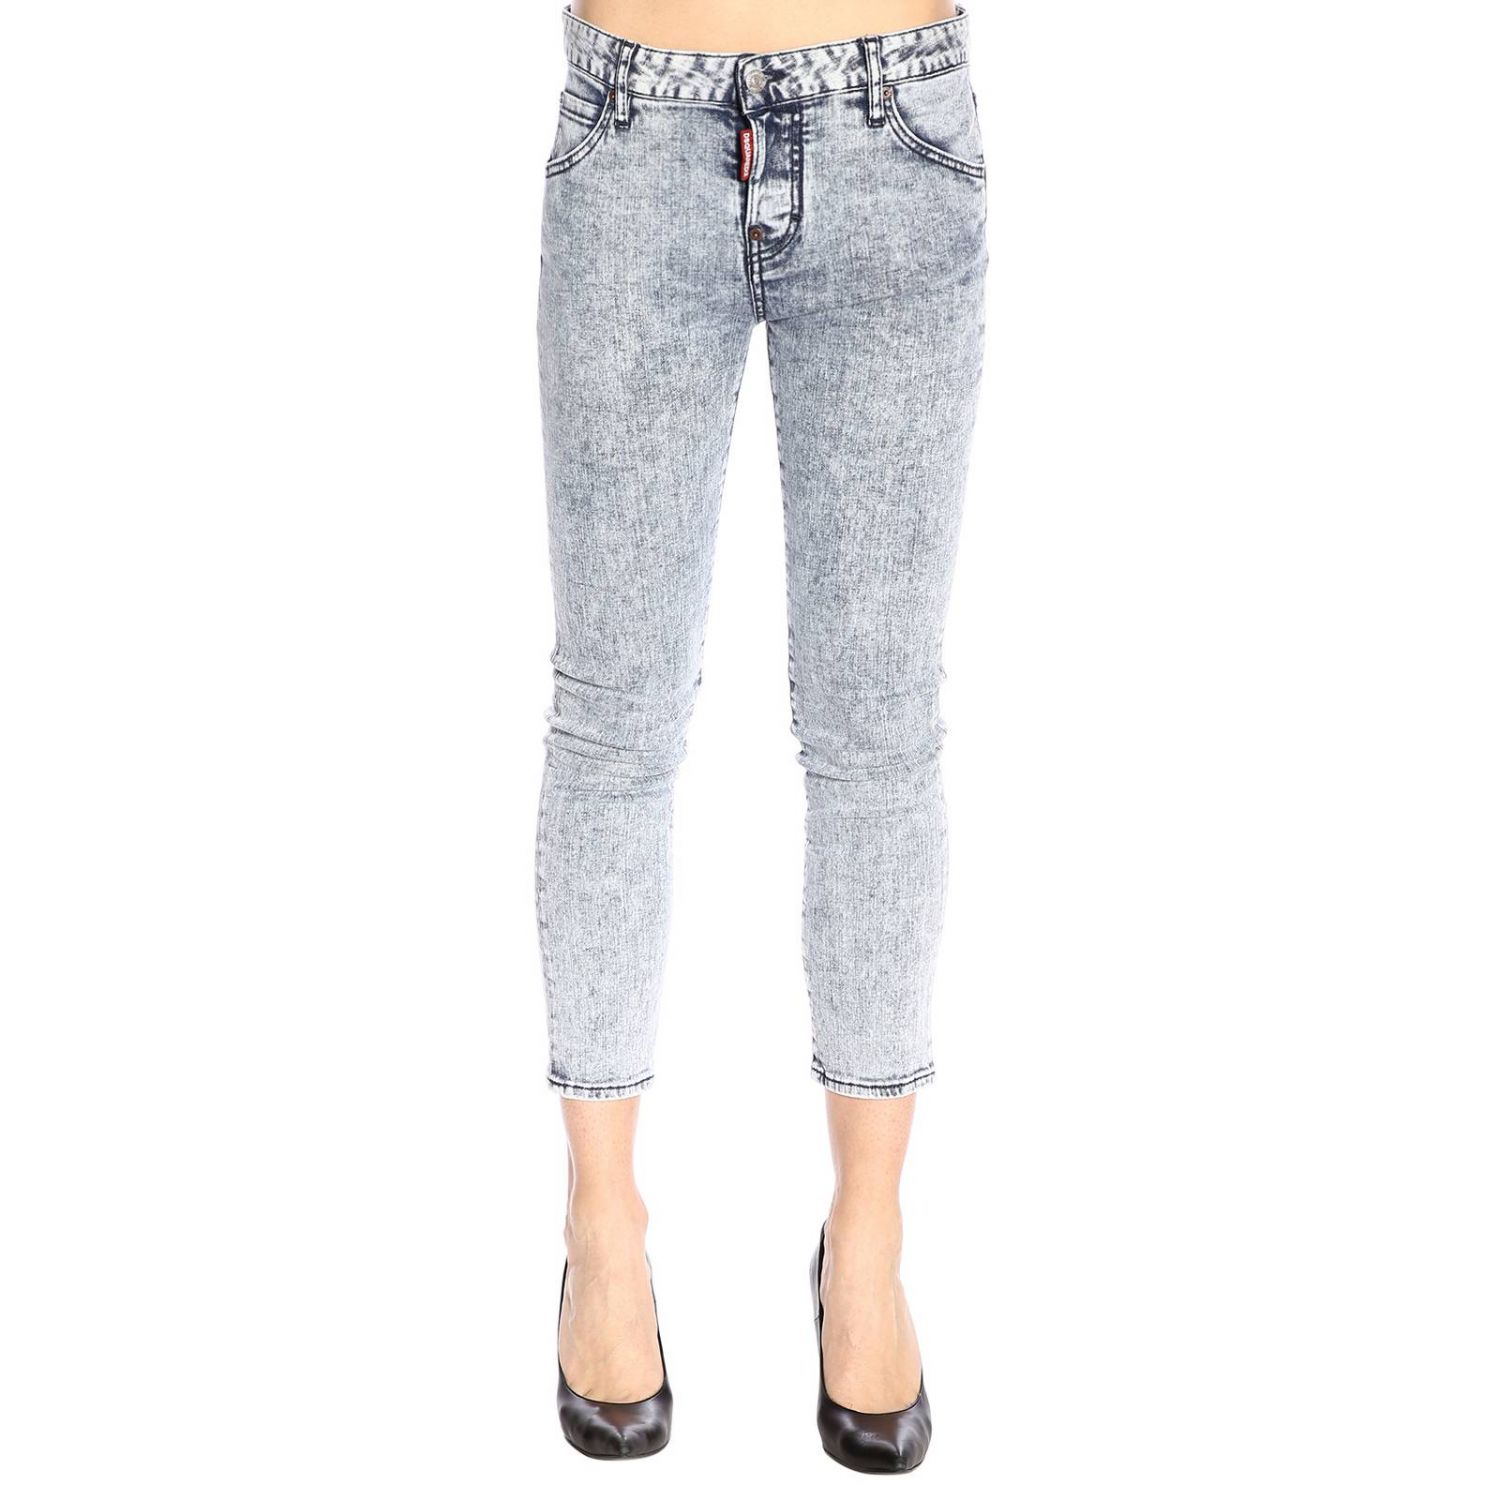 Dsquared2 Outlet: jeans for woman - Denim | Dsquared2 jeans ...